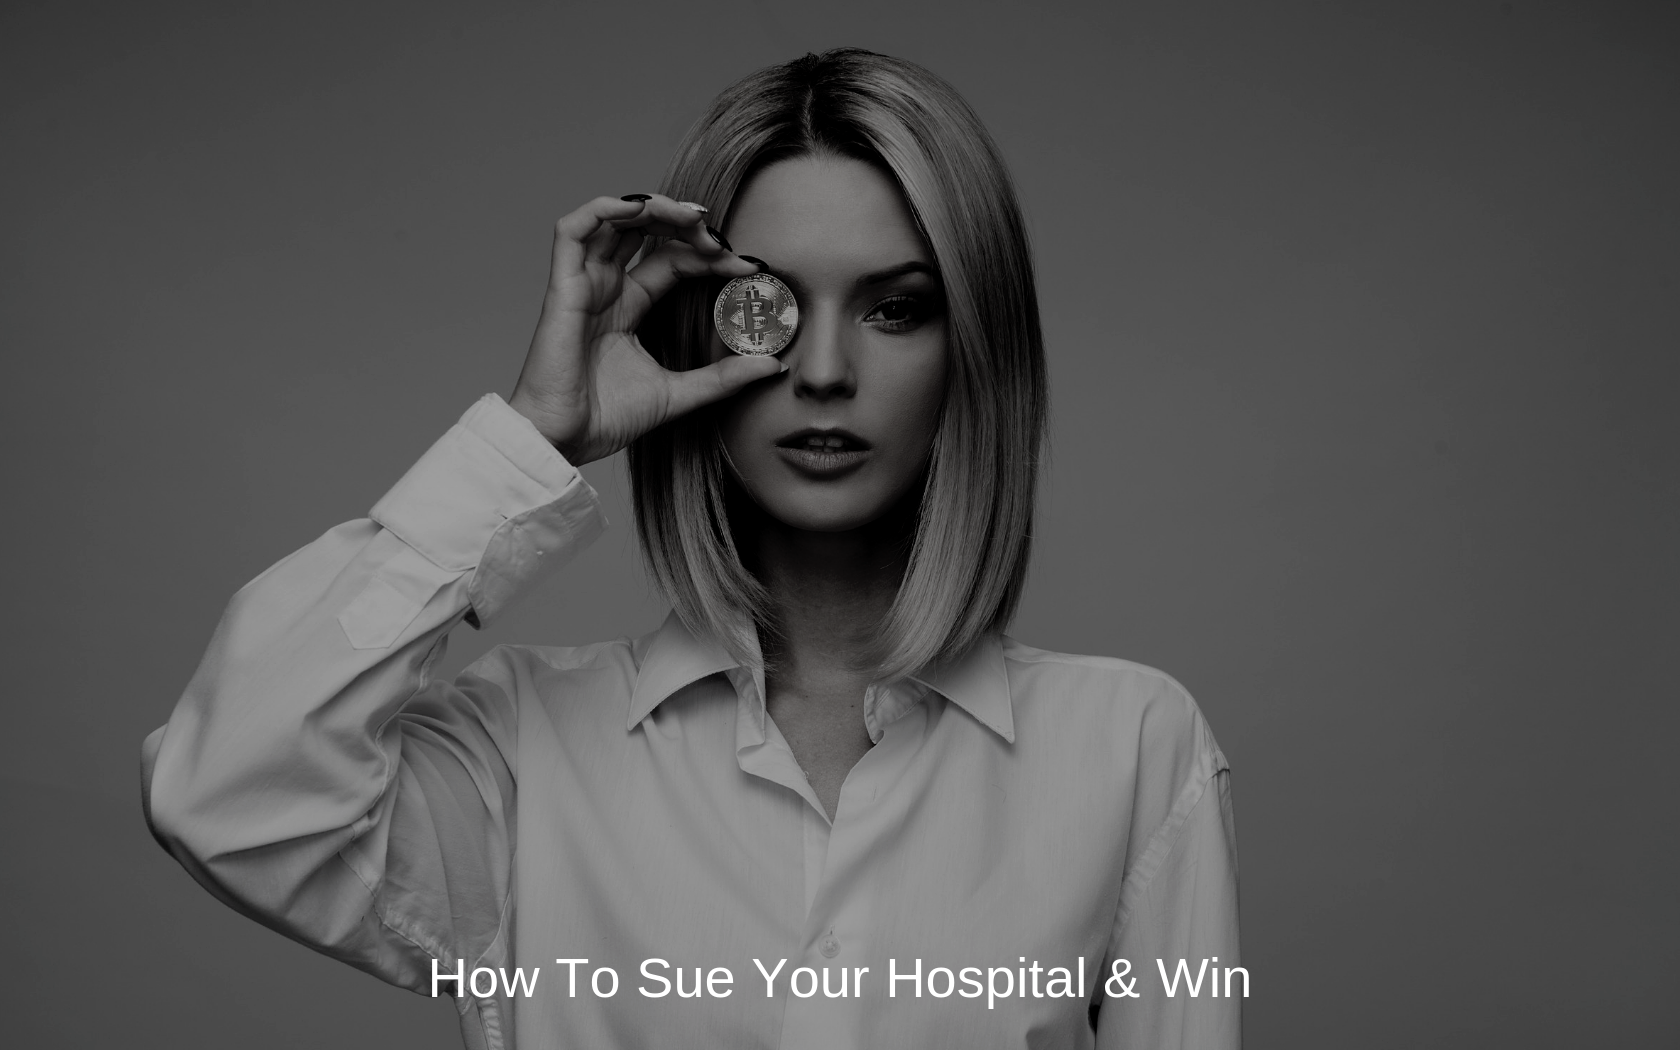 Image of Woman Holding Golden Coin, With Caption "How to sue your hospital and win"